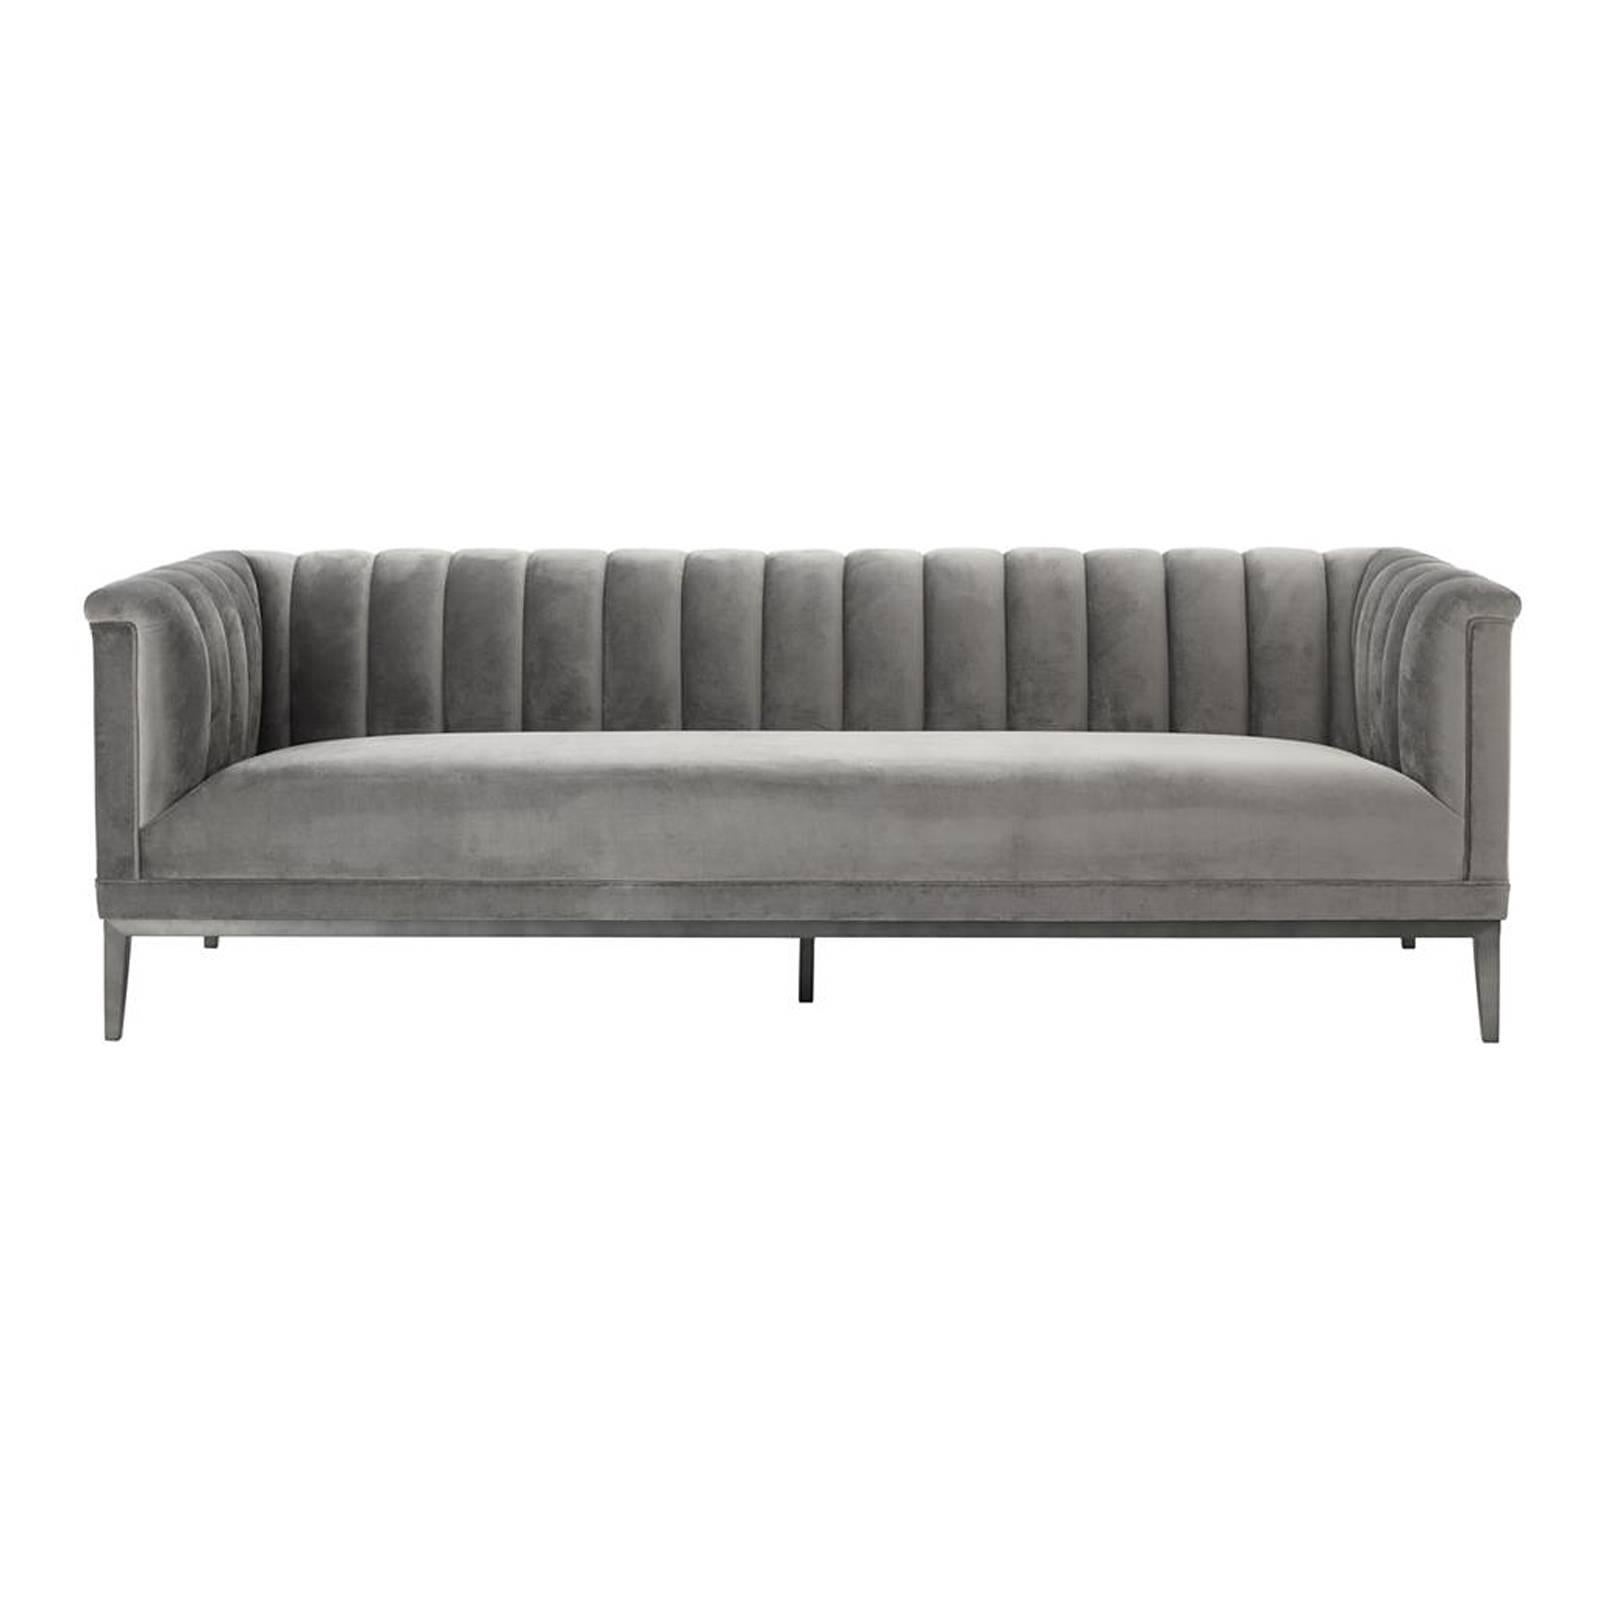 Sofa Stepper upholstered with porpoise grey
fabric. With solid wood structure and gunmetal 
base. Fabric with fire retardent treatment.
